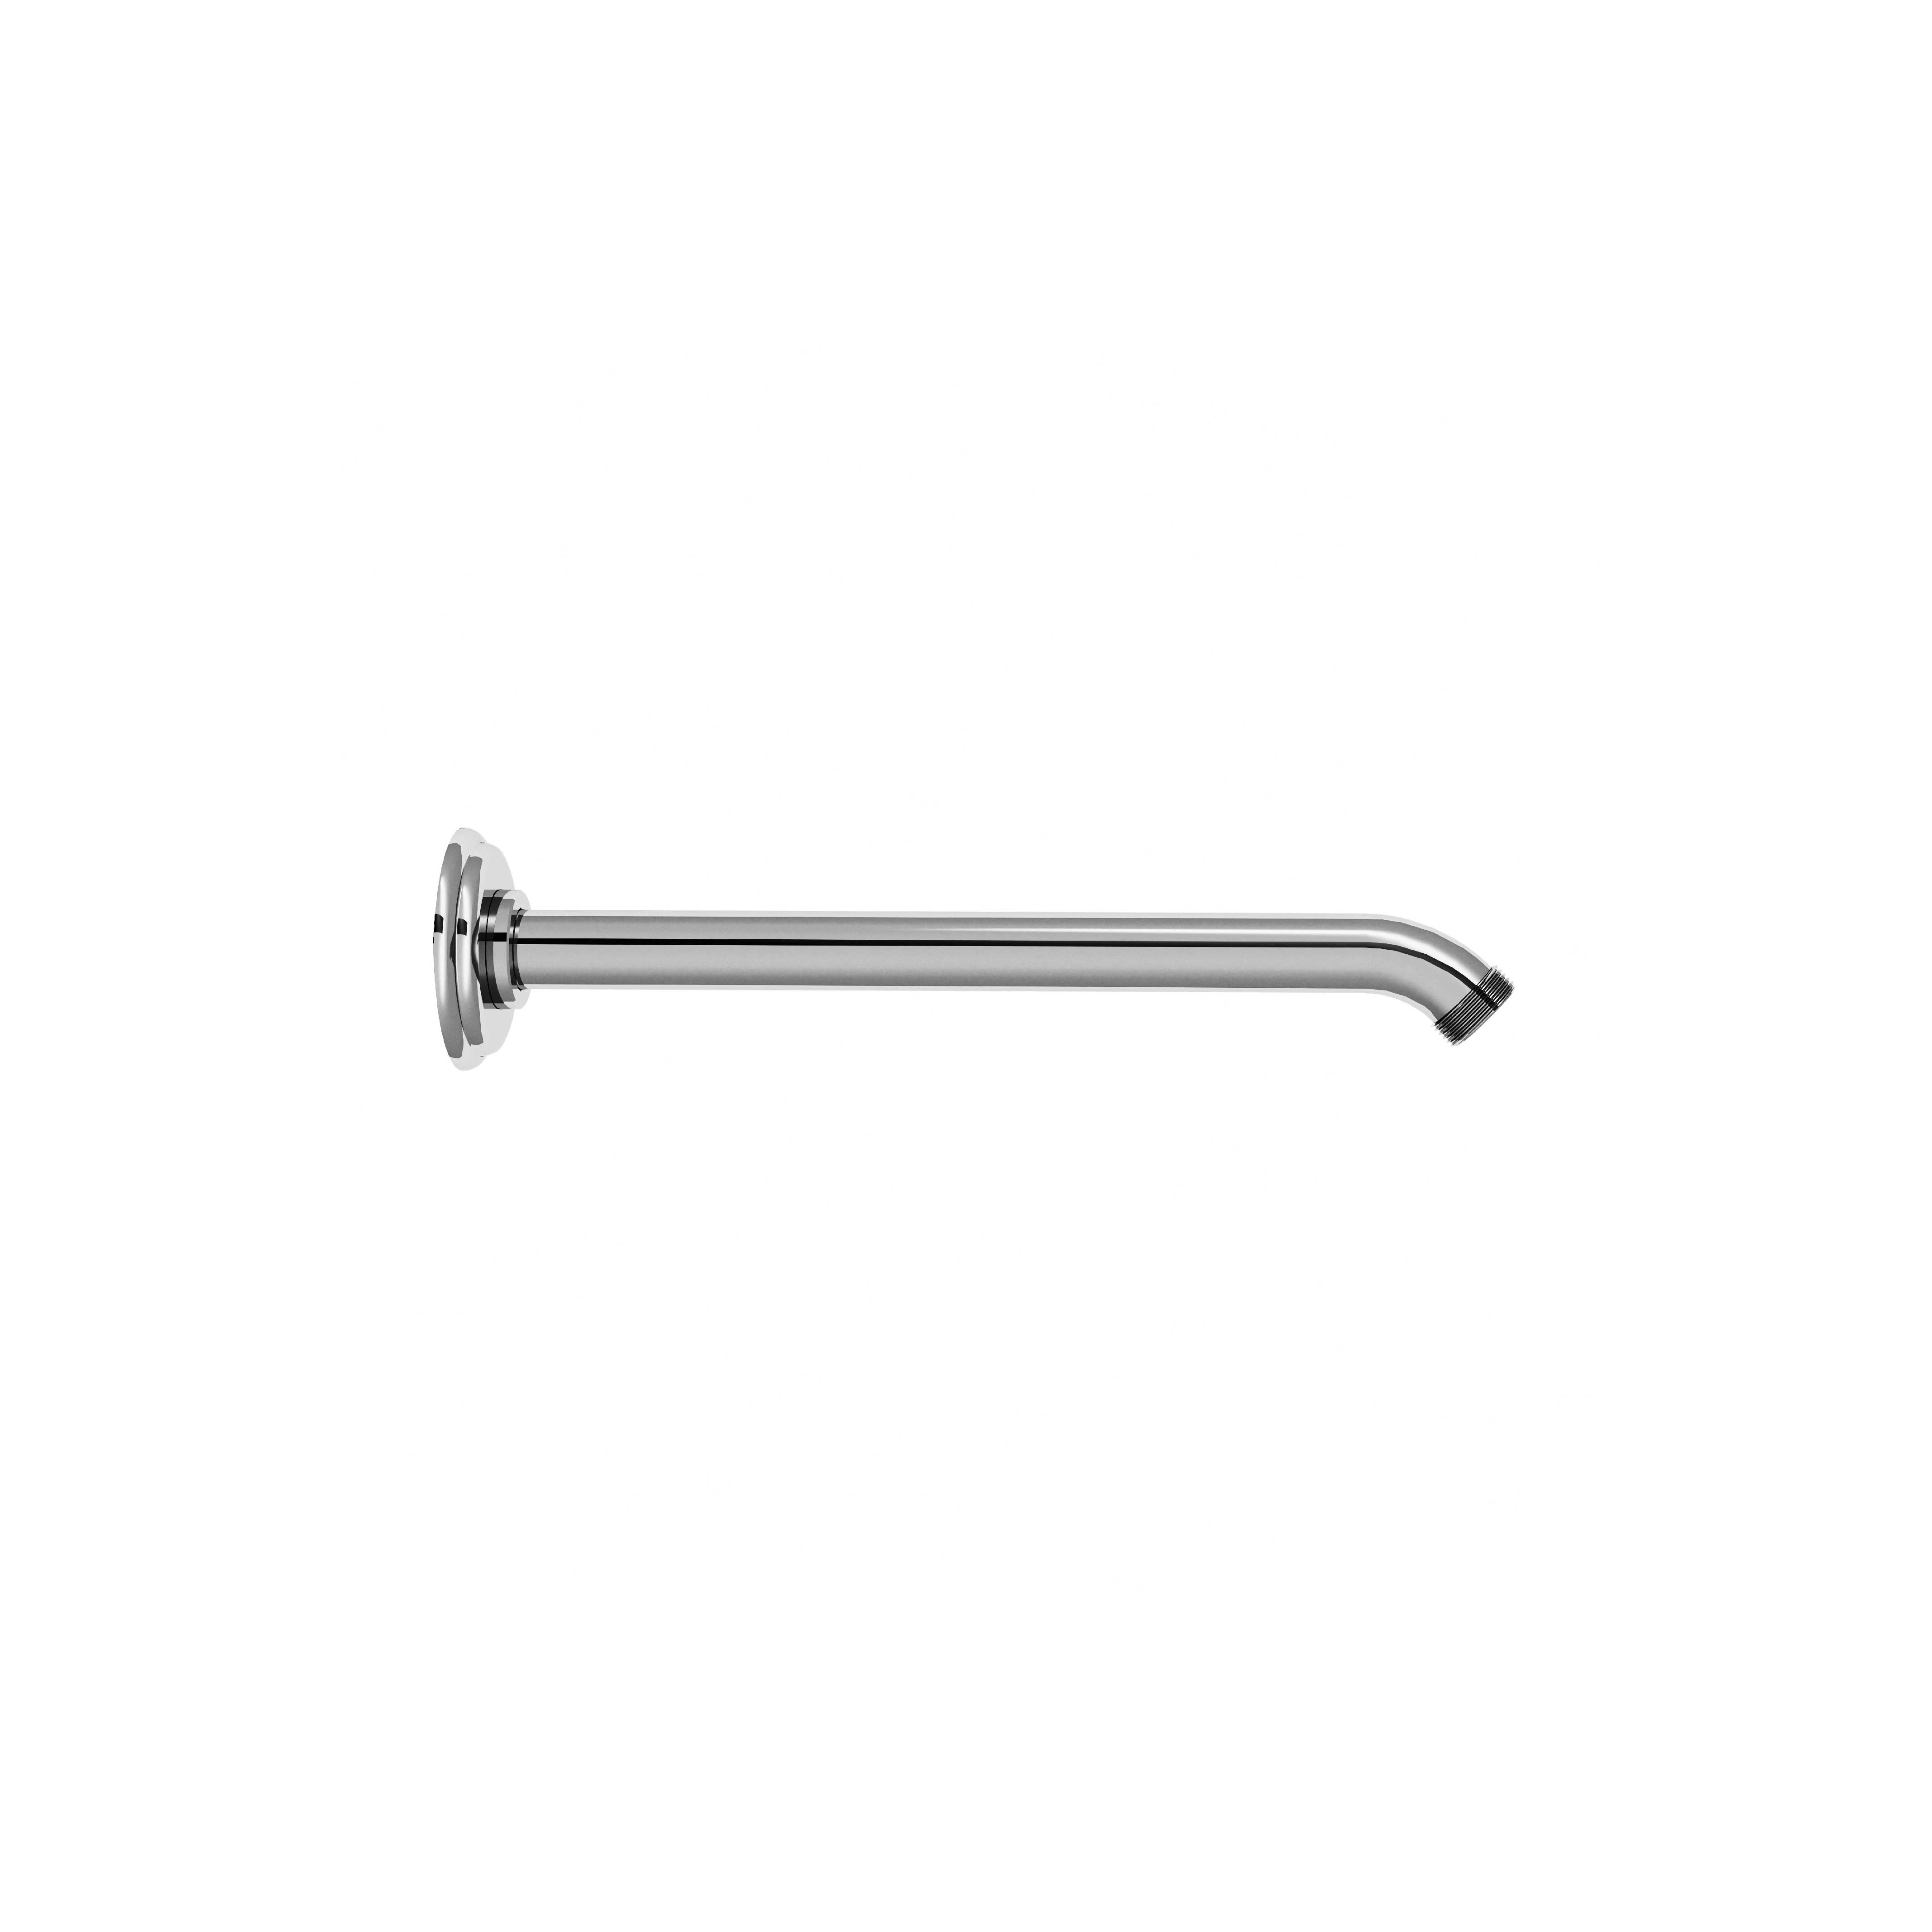 M20-2W170 Wall mounted shower arm 170mm